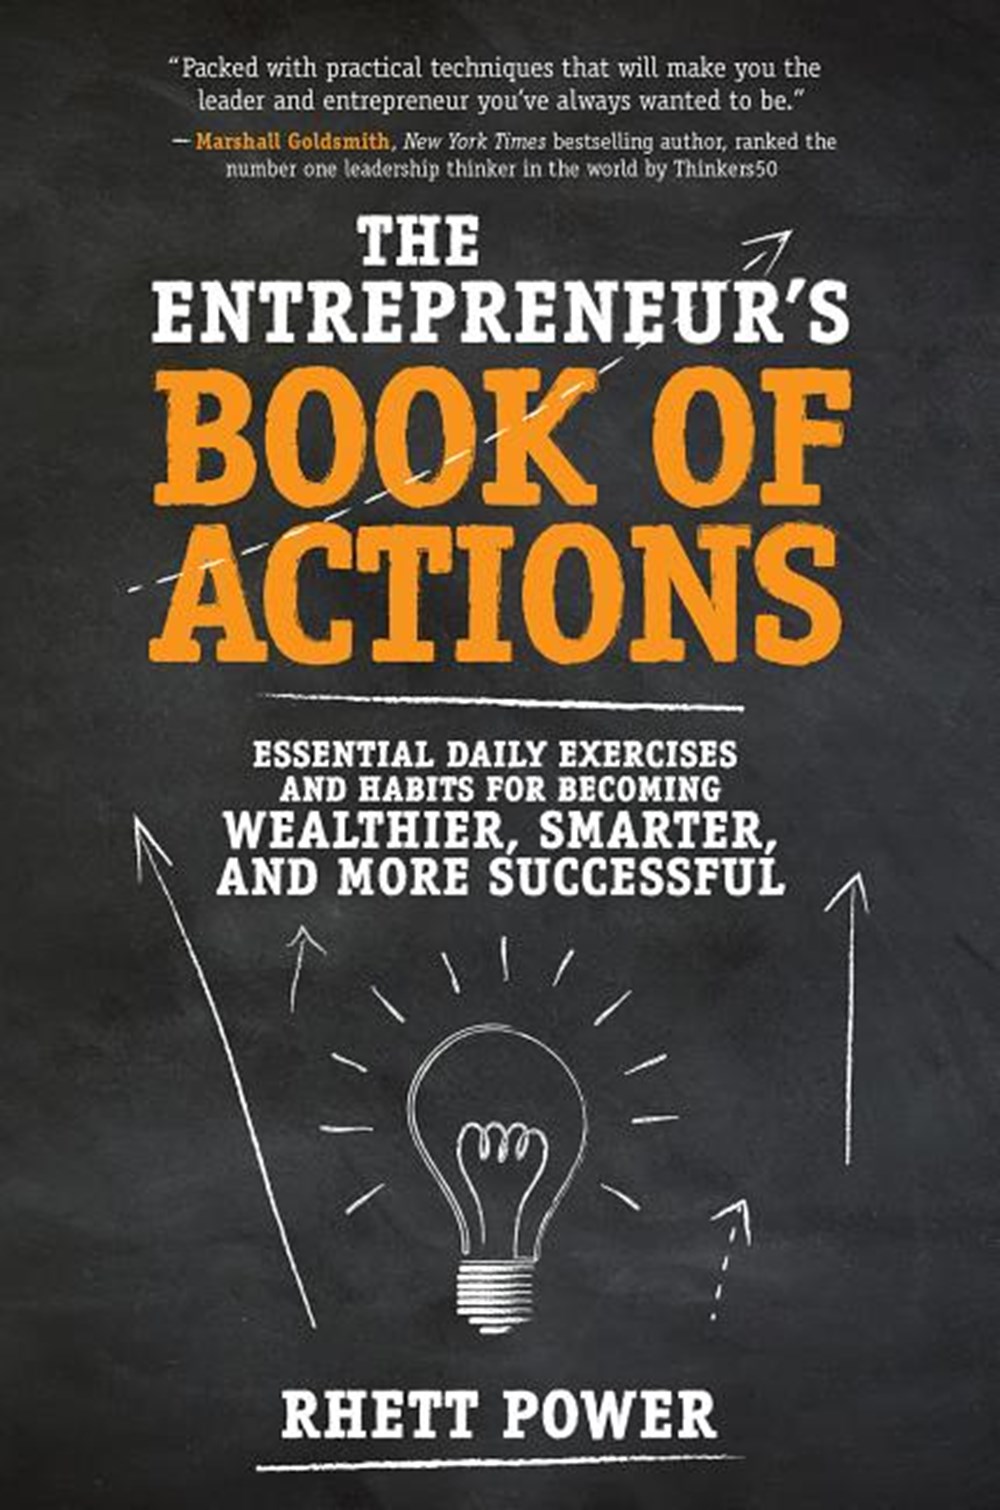 Entrepreneurs Book of Actions: Essential Daily Exercises and Habits for Becoming Wealthier, Smarter,